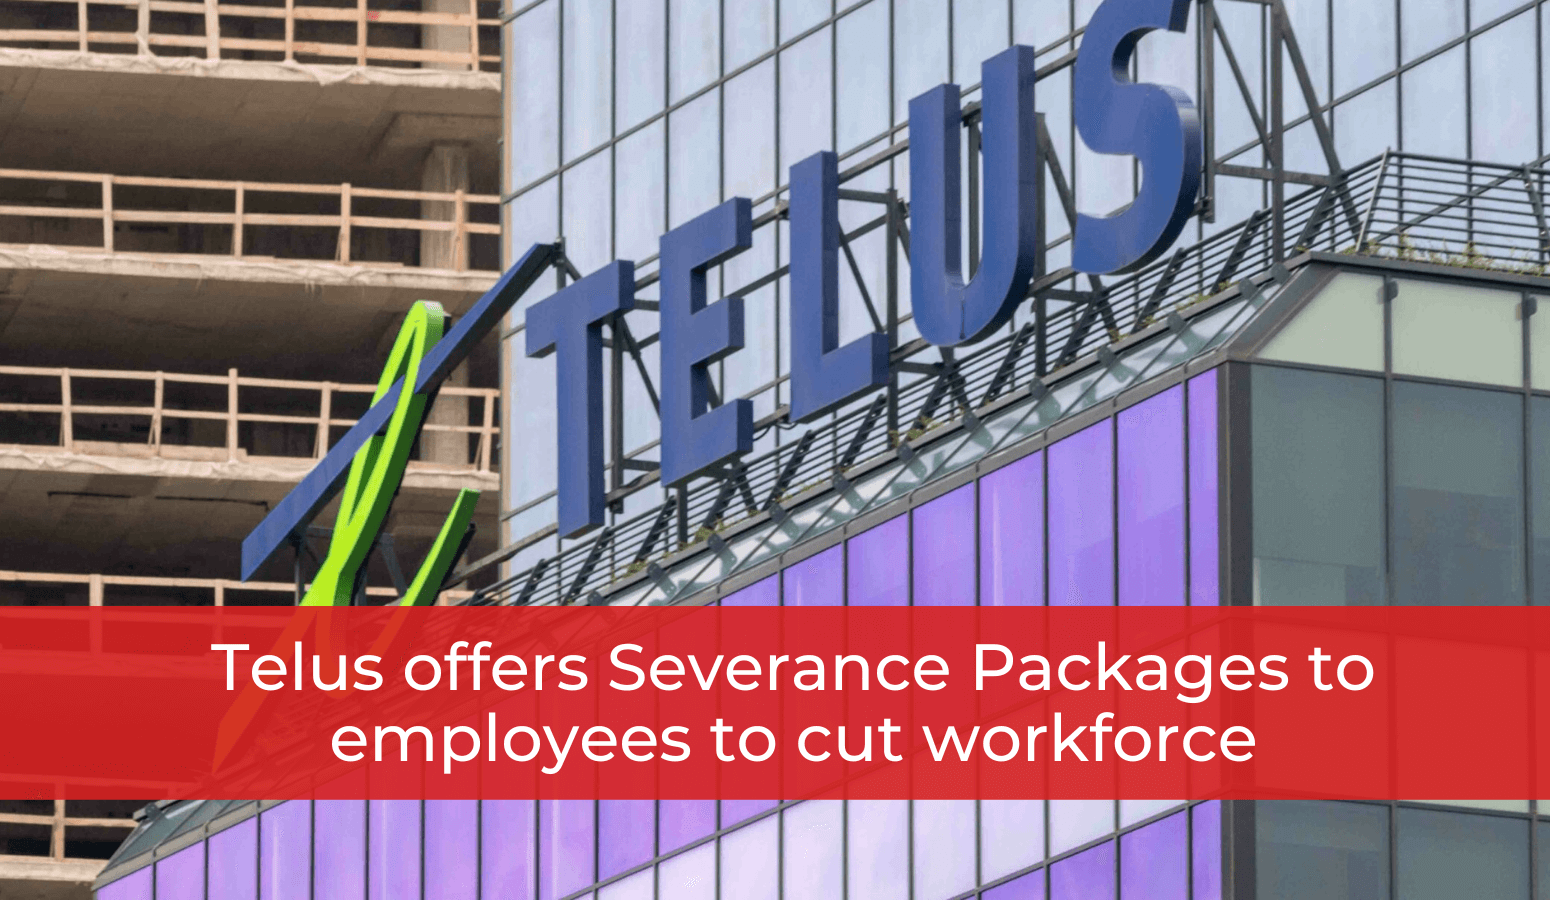 Featured image for “Telus offers Severance Packages to employees to cut workforce”